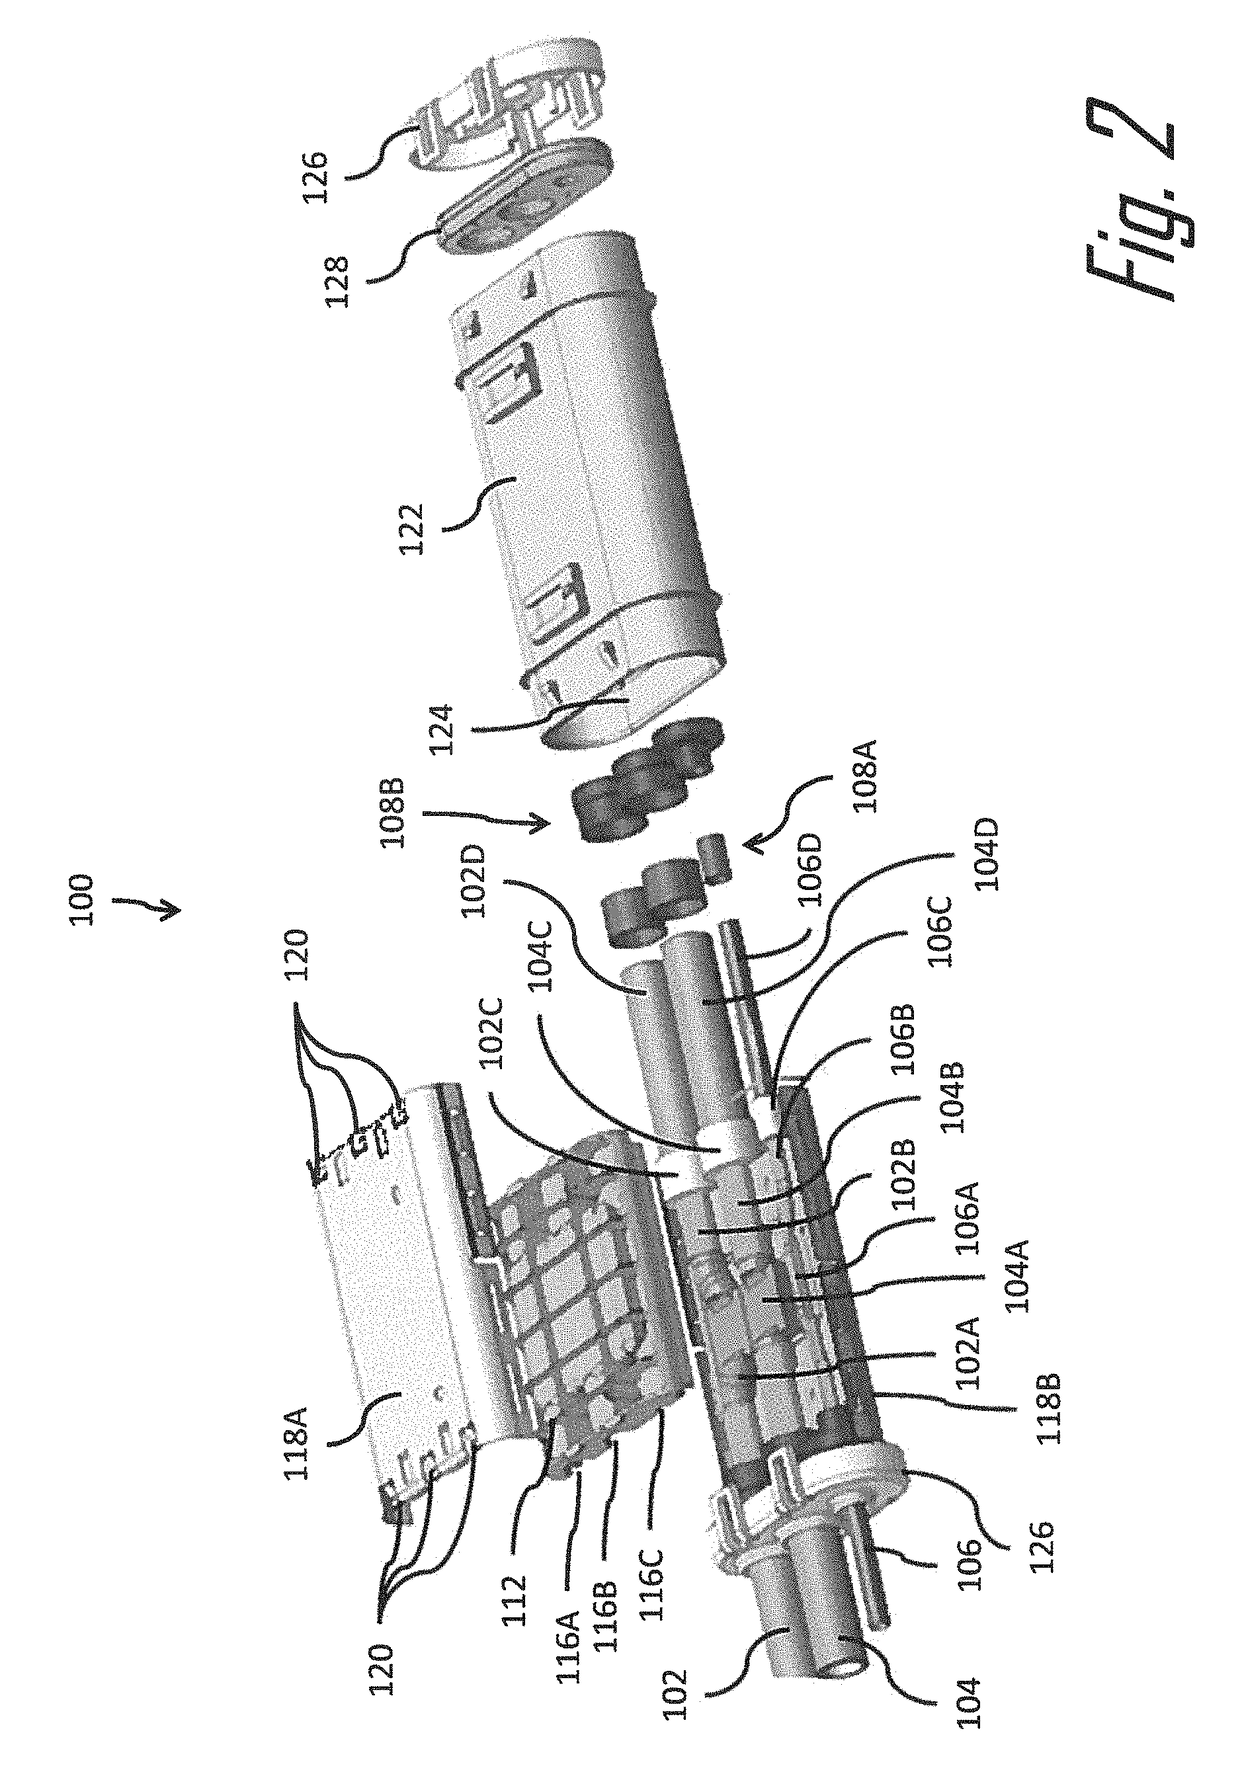 Device and method for splicing shielded wire cables